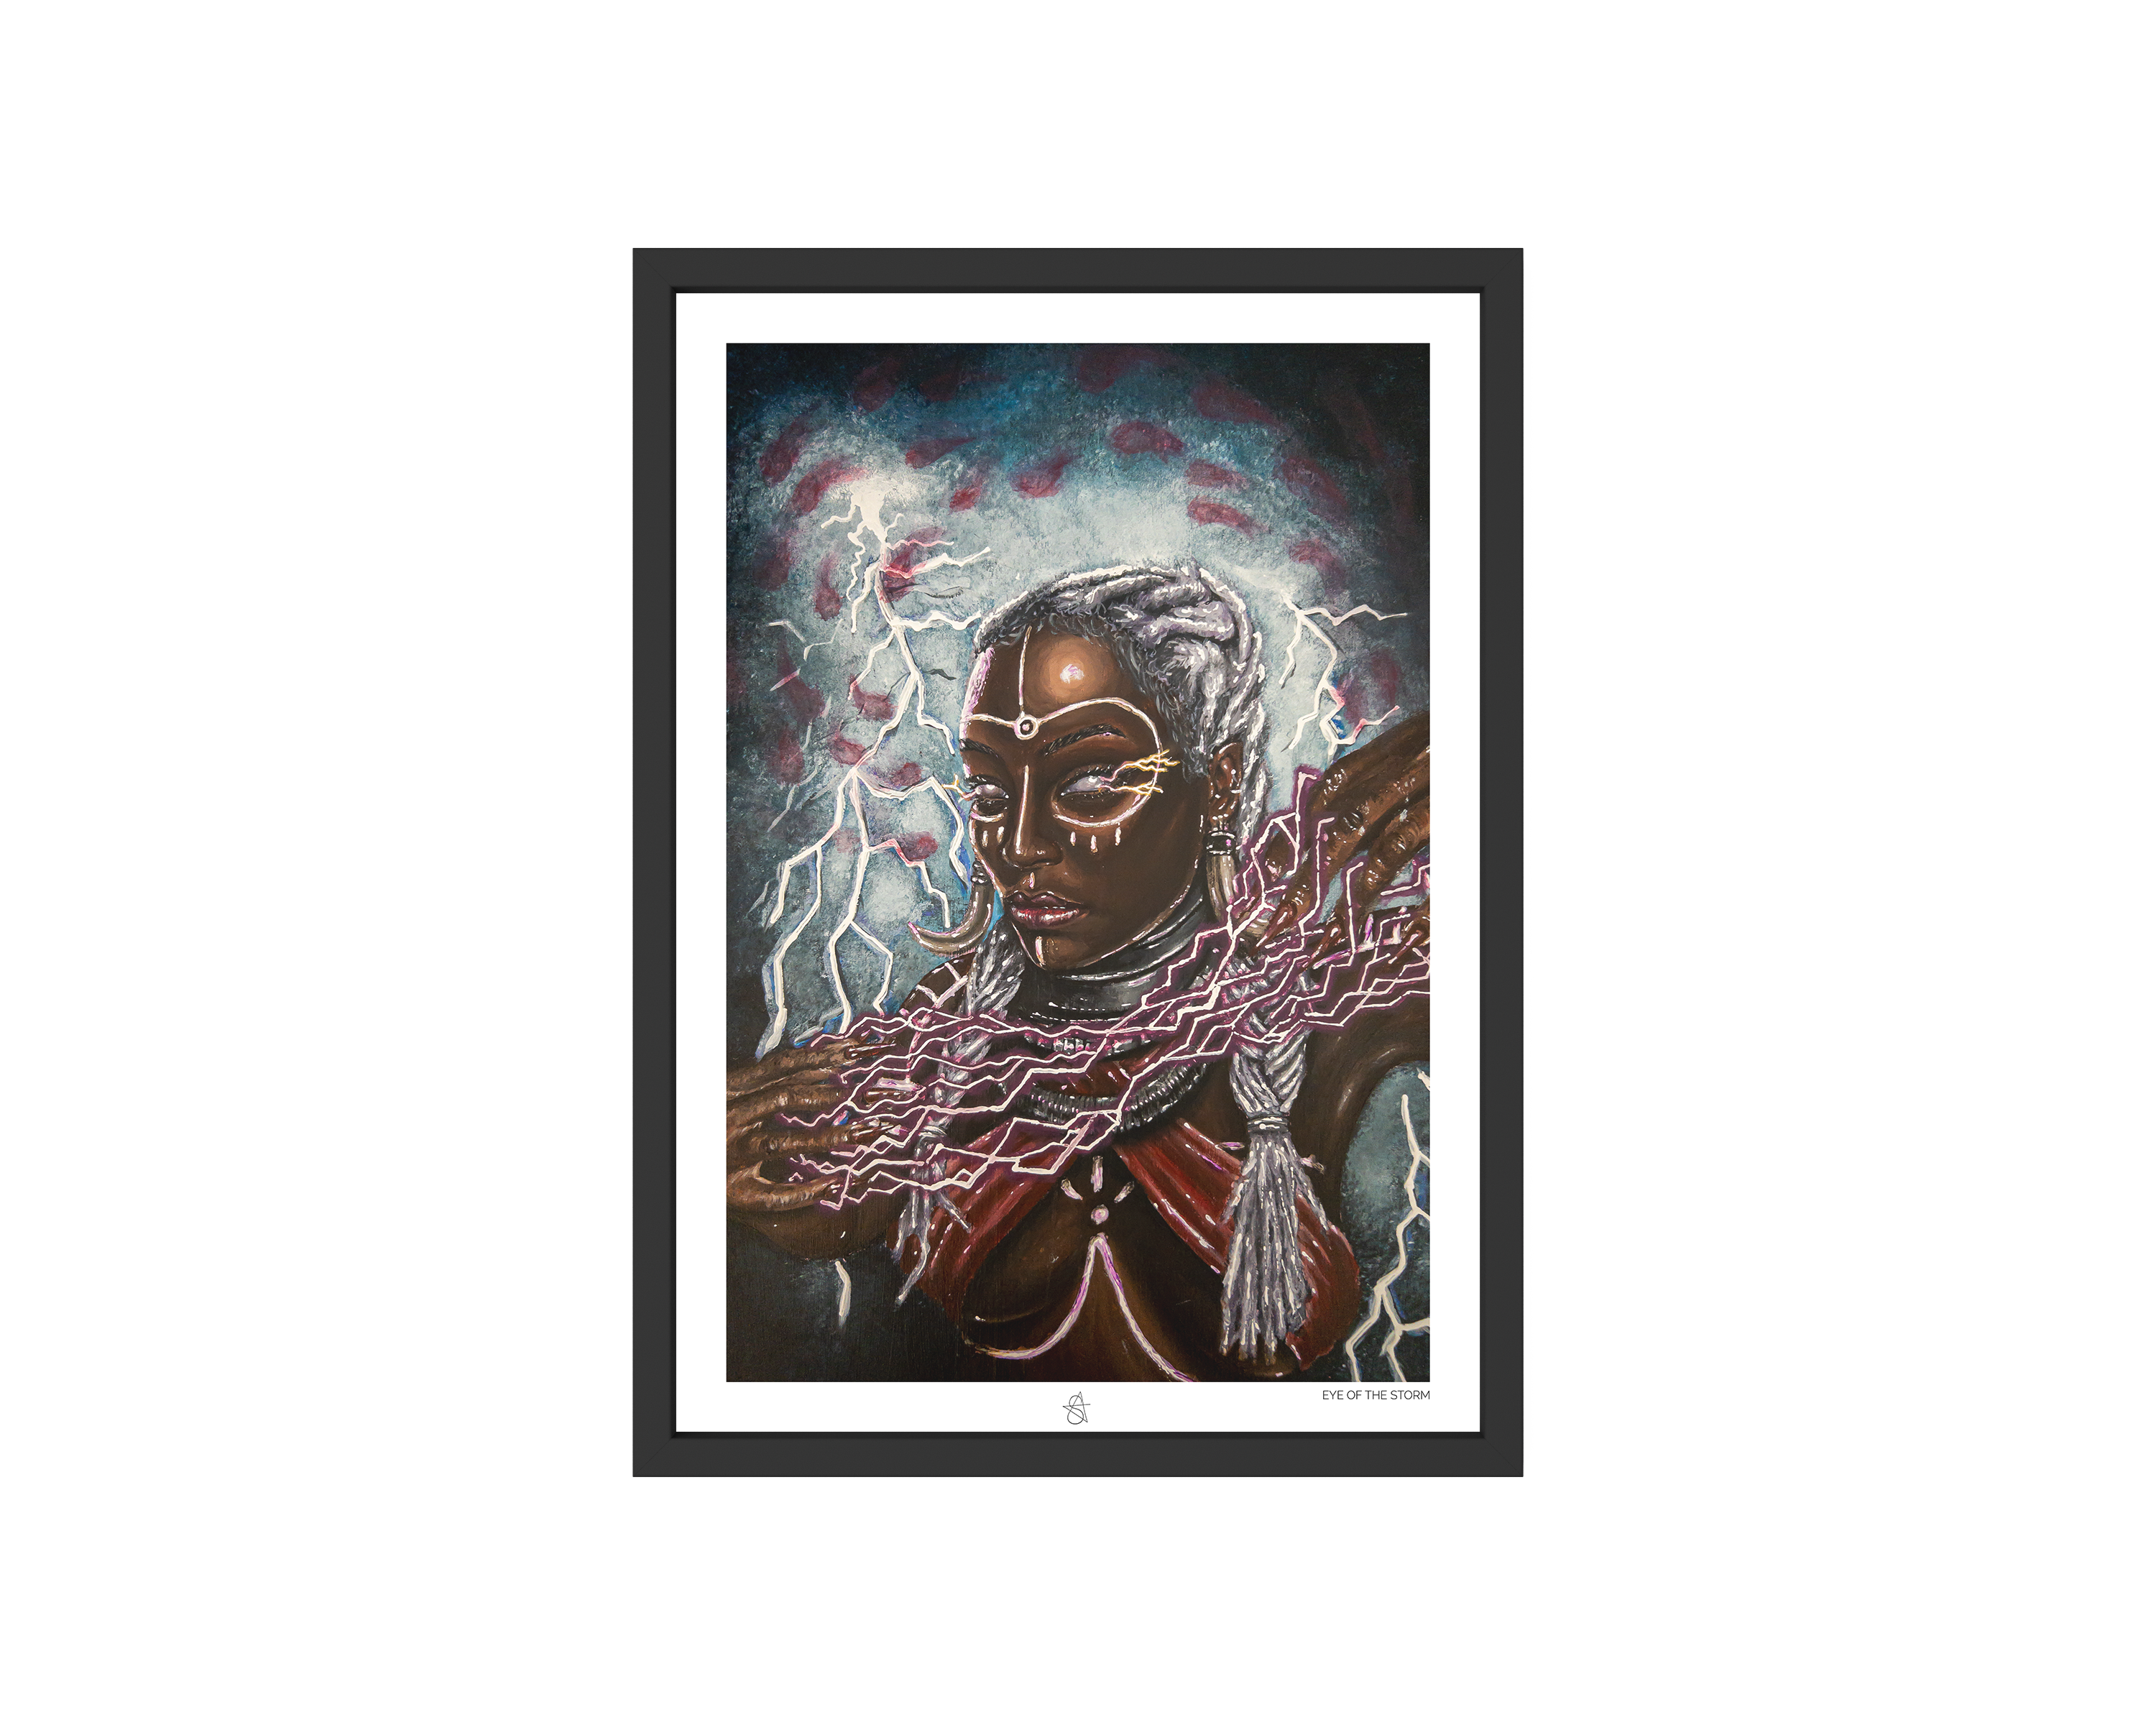 Ọya Art Print on high-quality matte or velvet paper, framed in gallery black, white, or natural maple, depicting Yoruba Orisa of storms and wind.